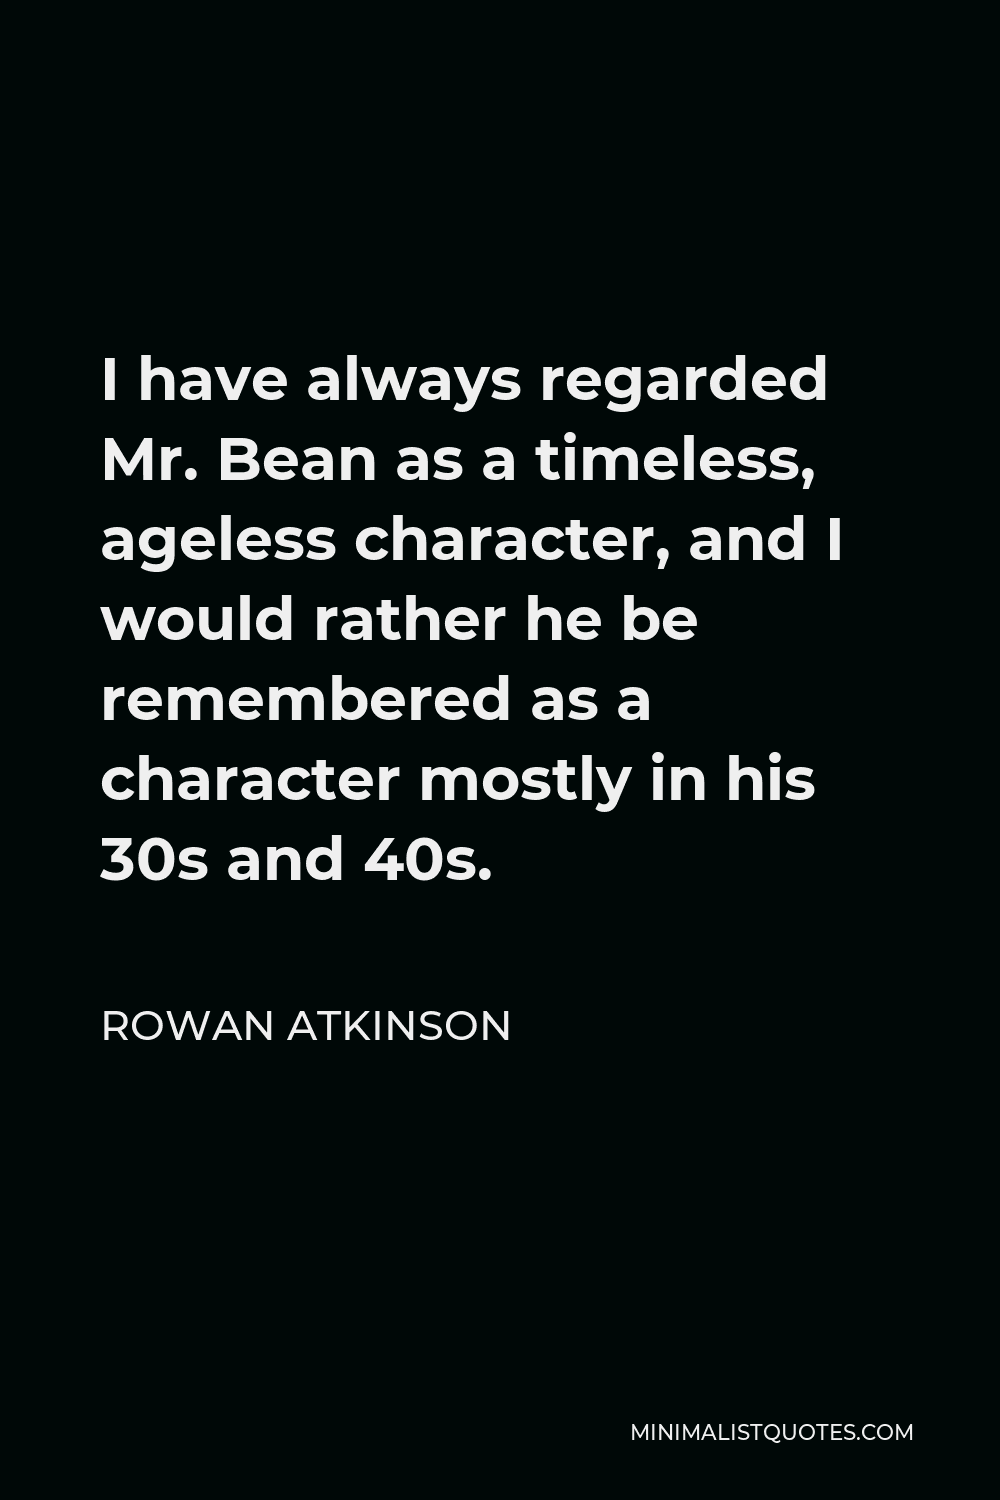 Rowan Atkinson Quote - I have always regarded Mr. Bean as a timeless, ageless character, and I would rather he be remembered as a character mostly in his 30s and 40s.